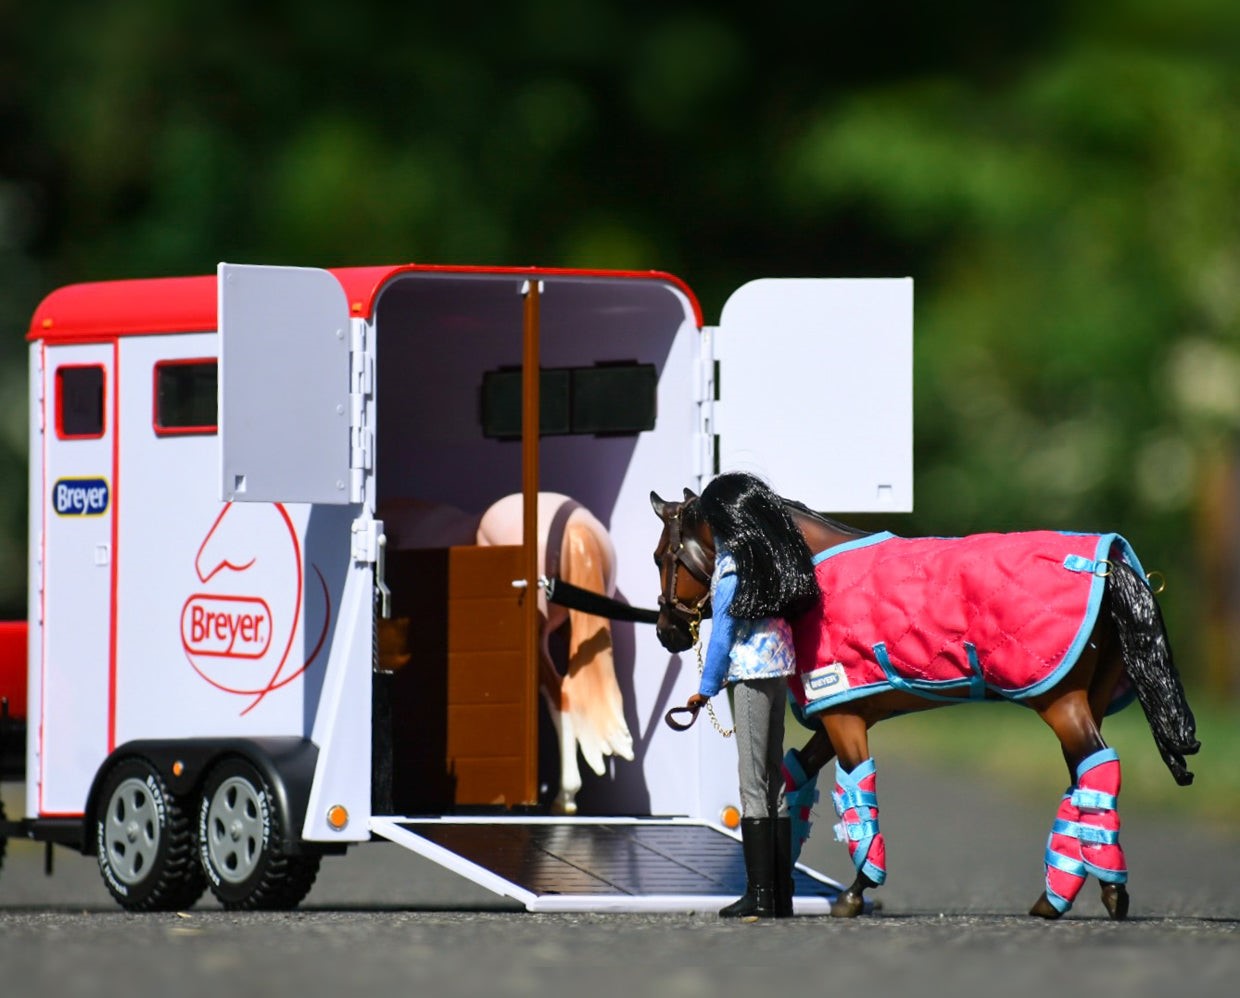 Breyer Traditional Series Two-Horse Trailer